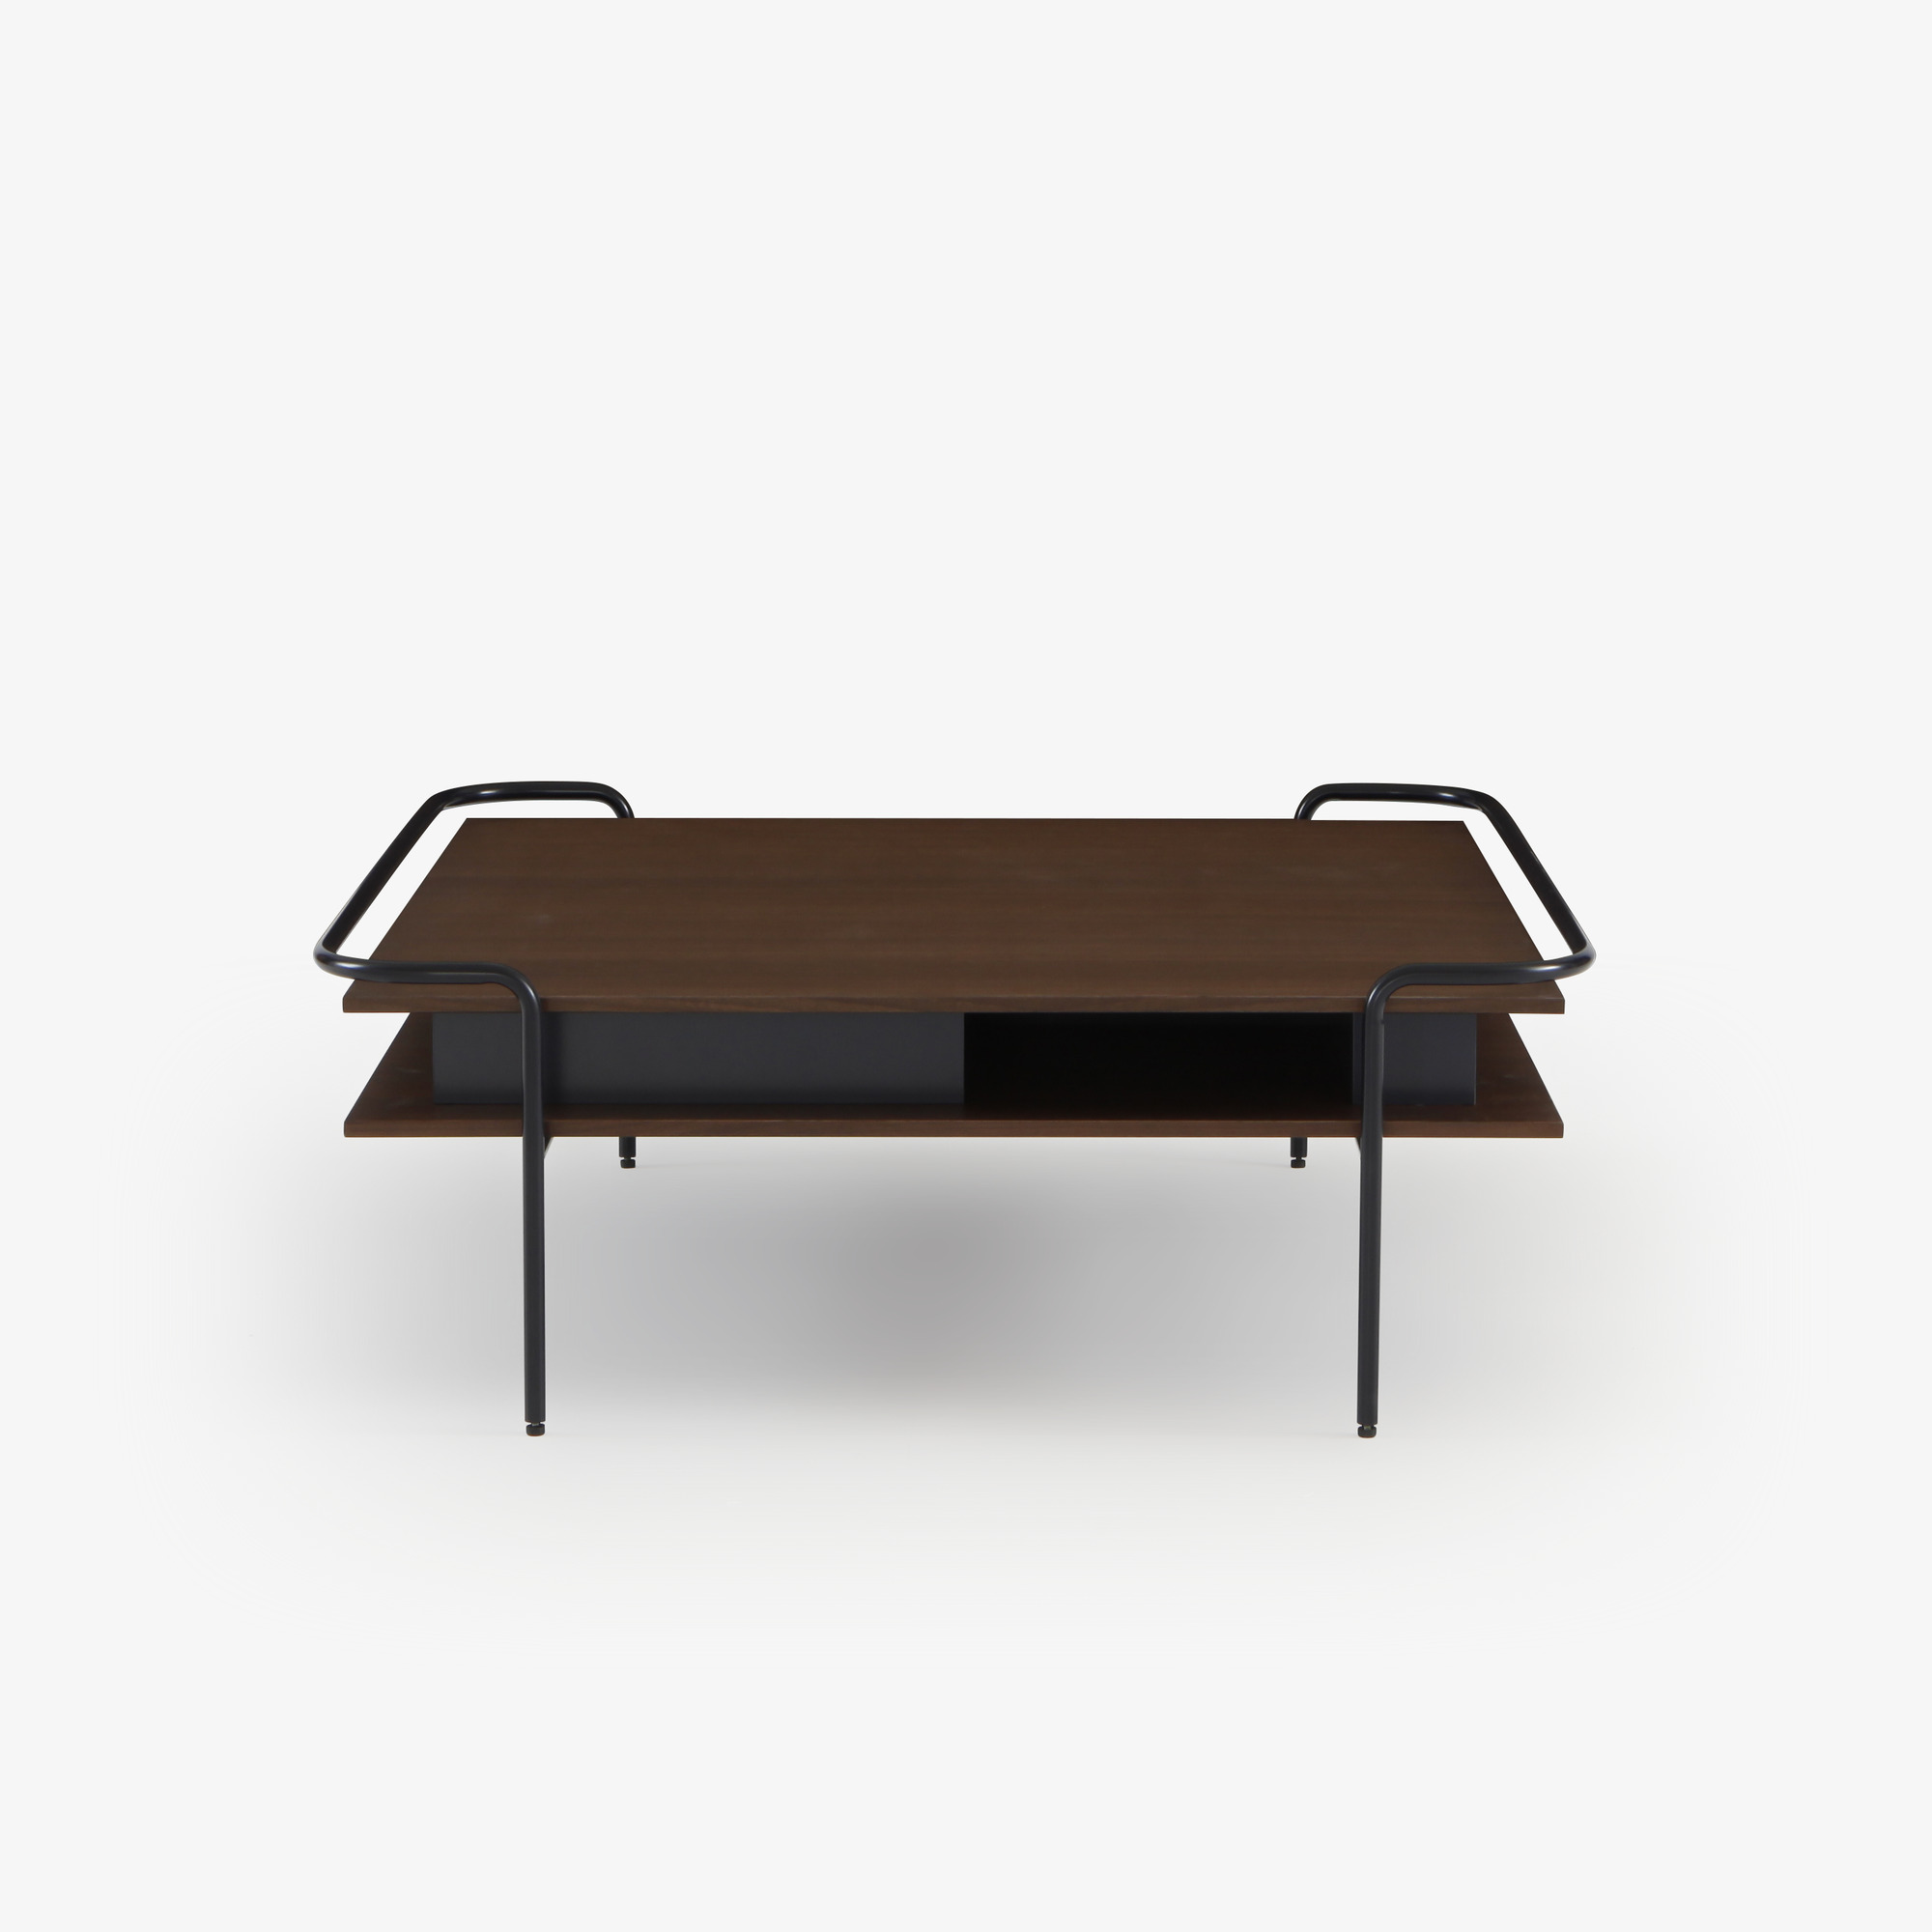 Image Square low table   1